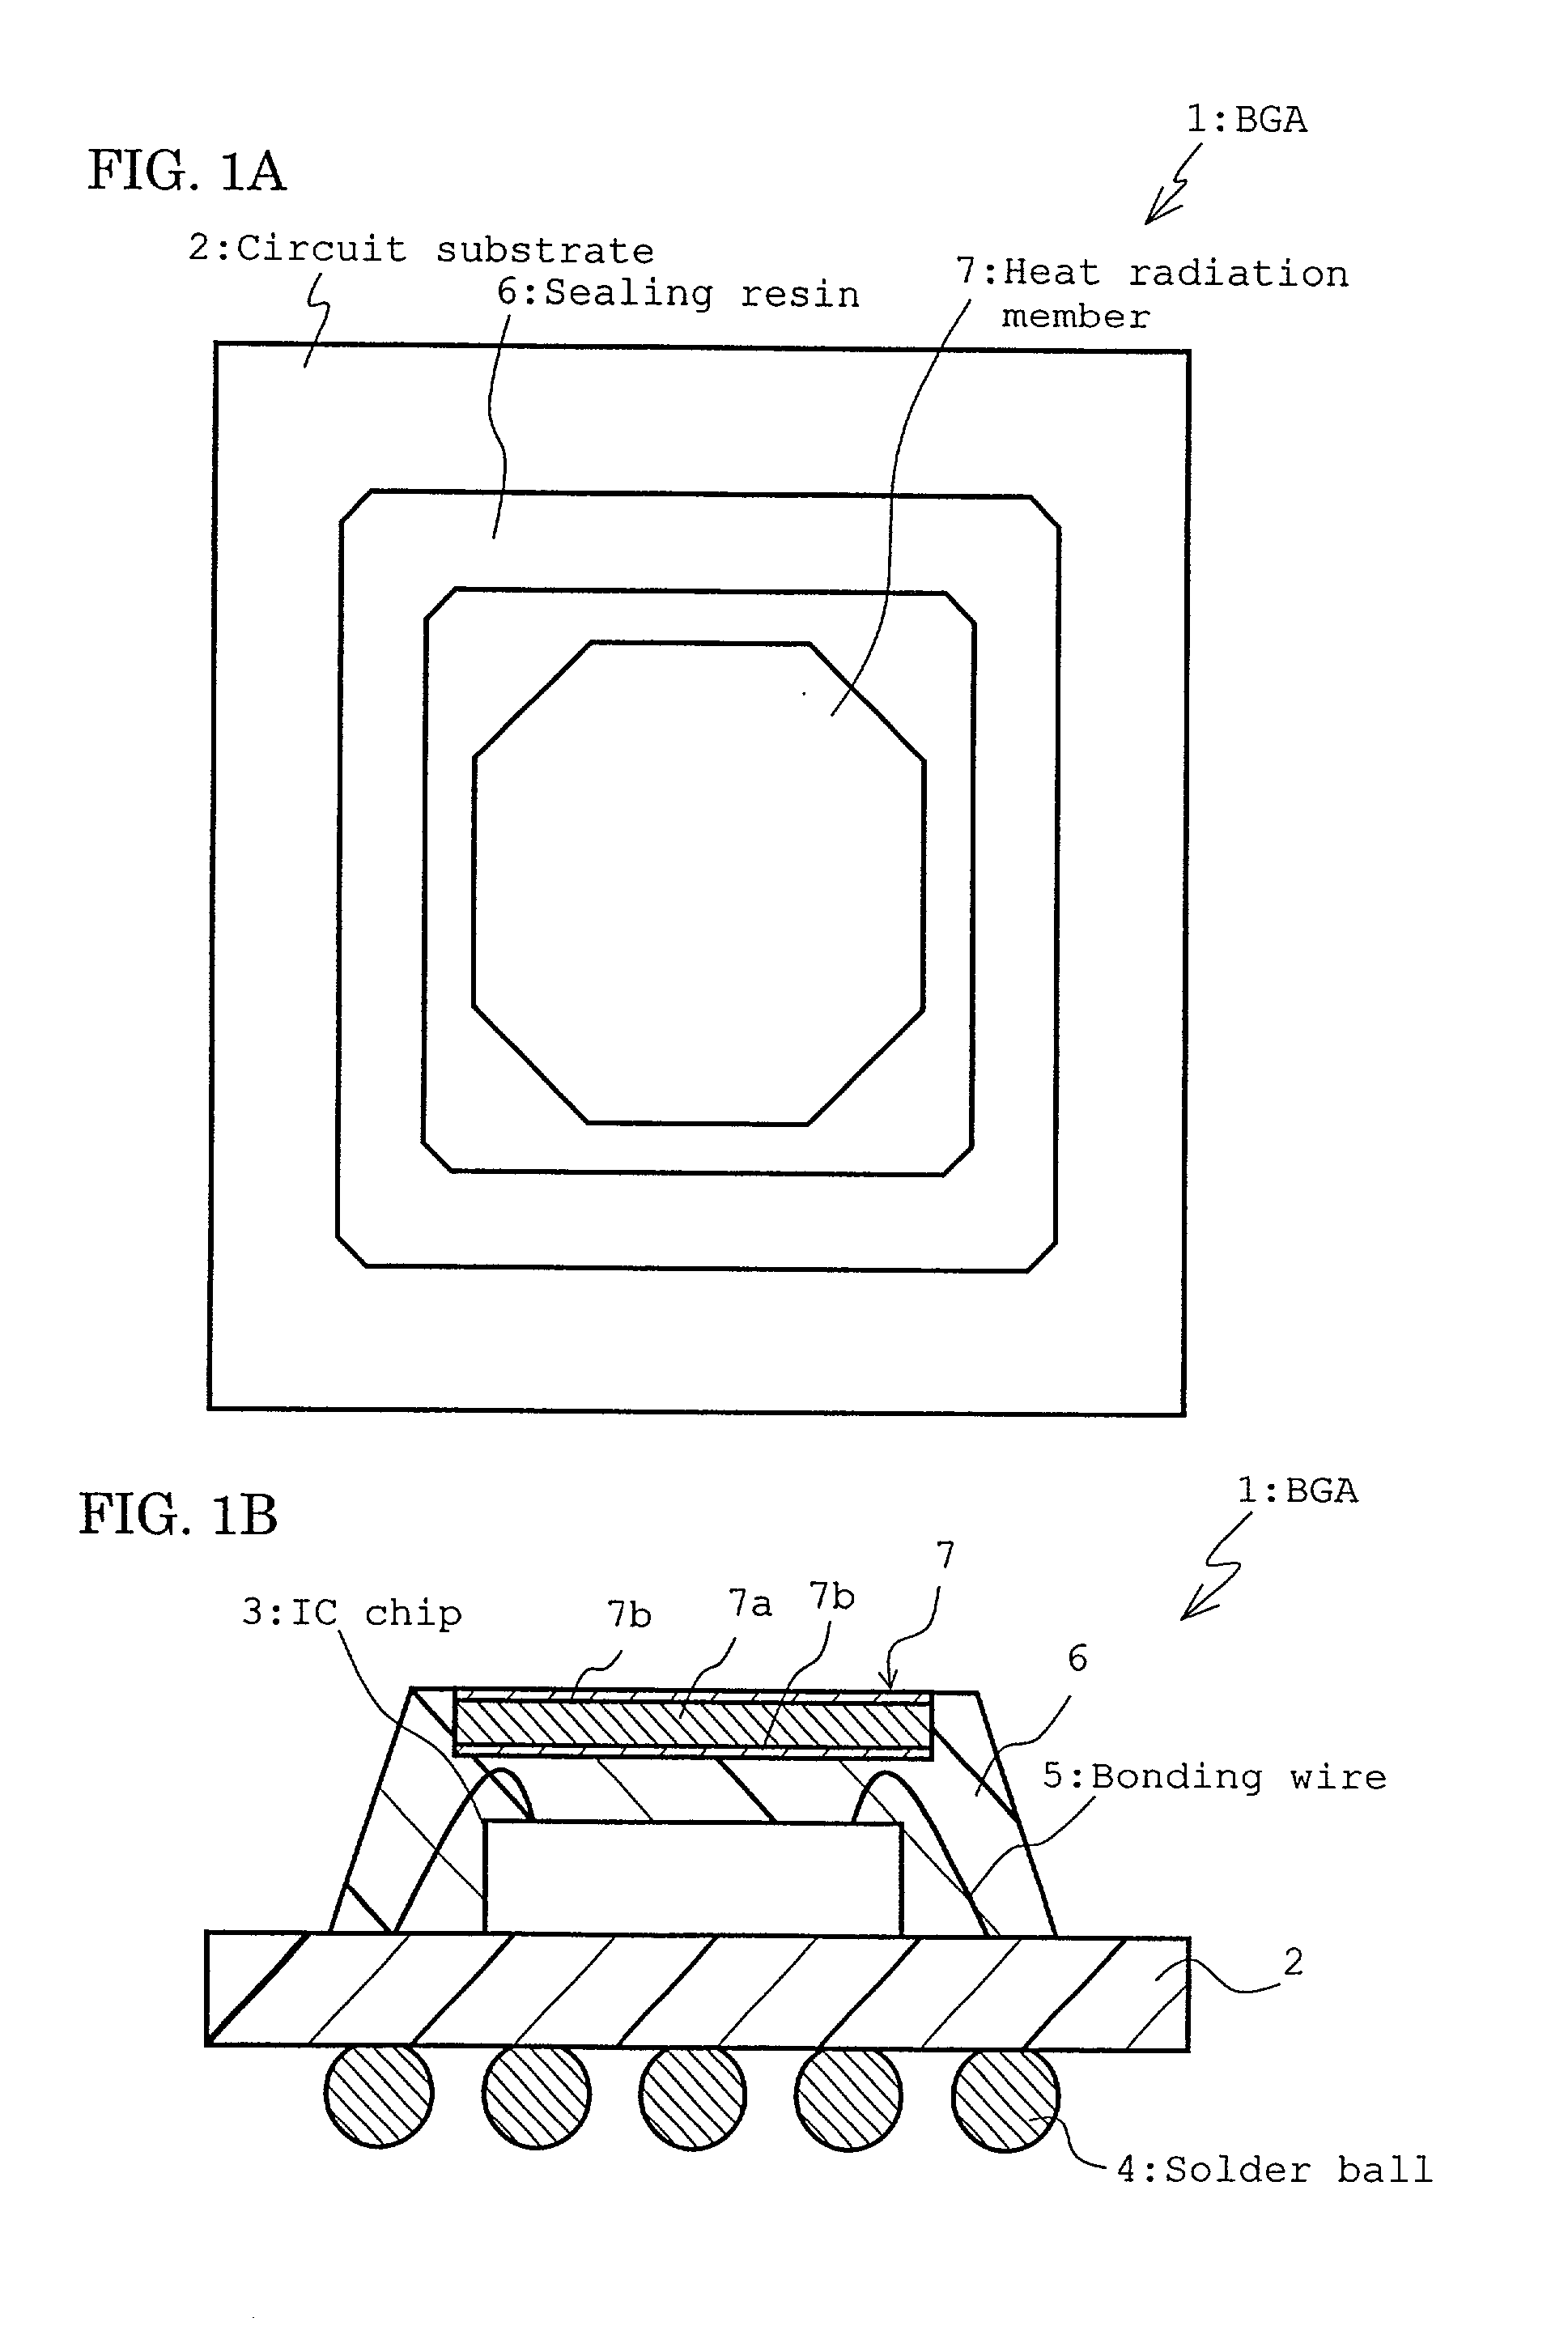 Resin sealed semiconductor device